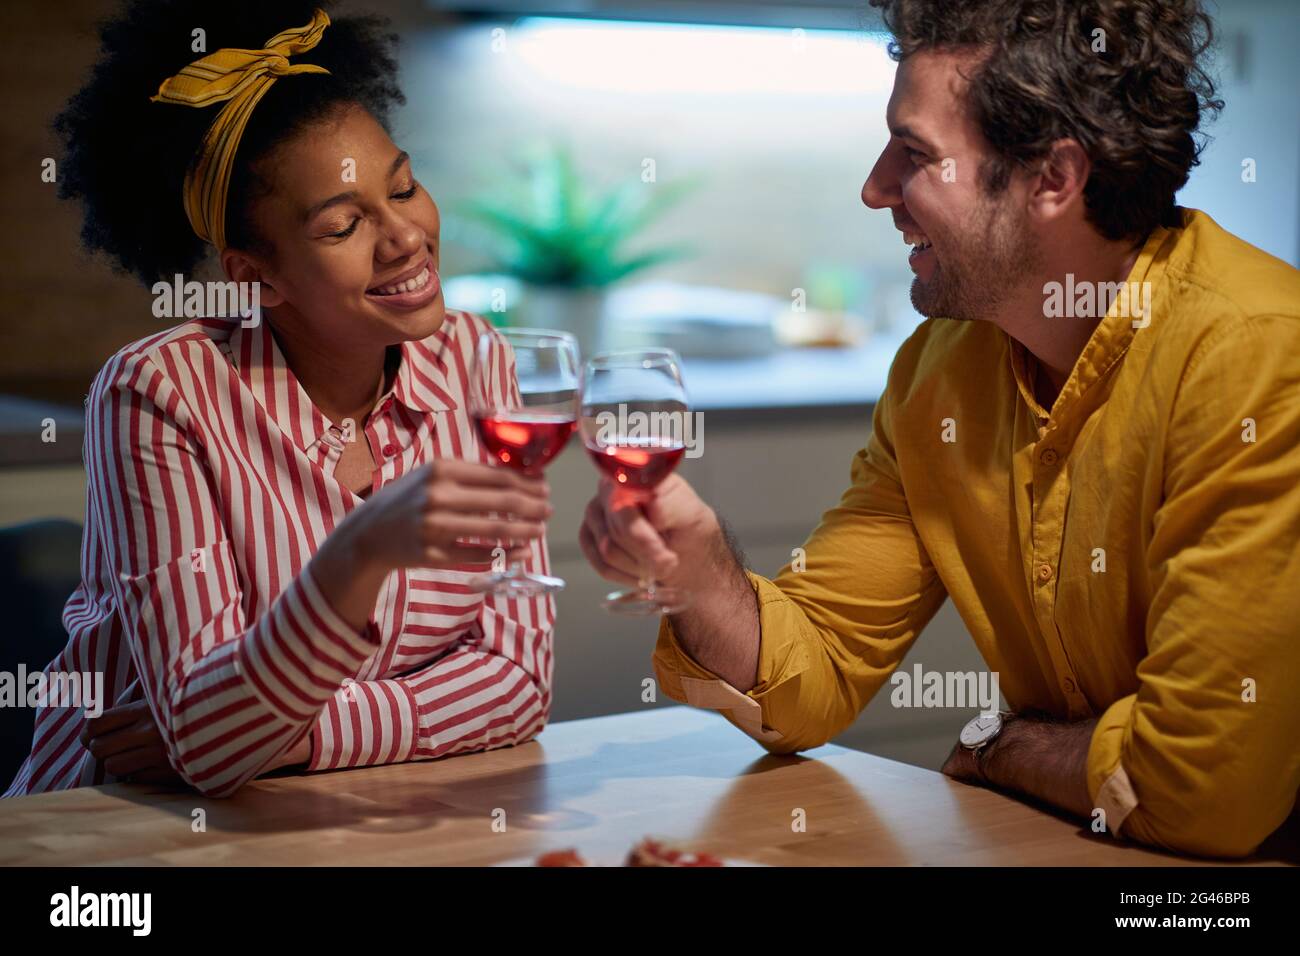 beautiful young afro-american woman pleasantly smiling while toasting with caucasian beardy man. Stock Photo